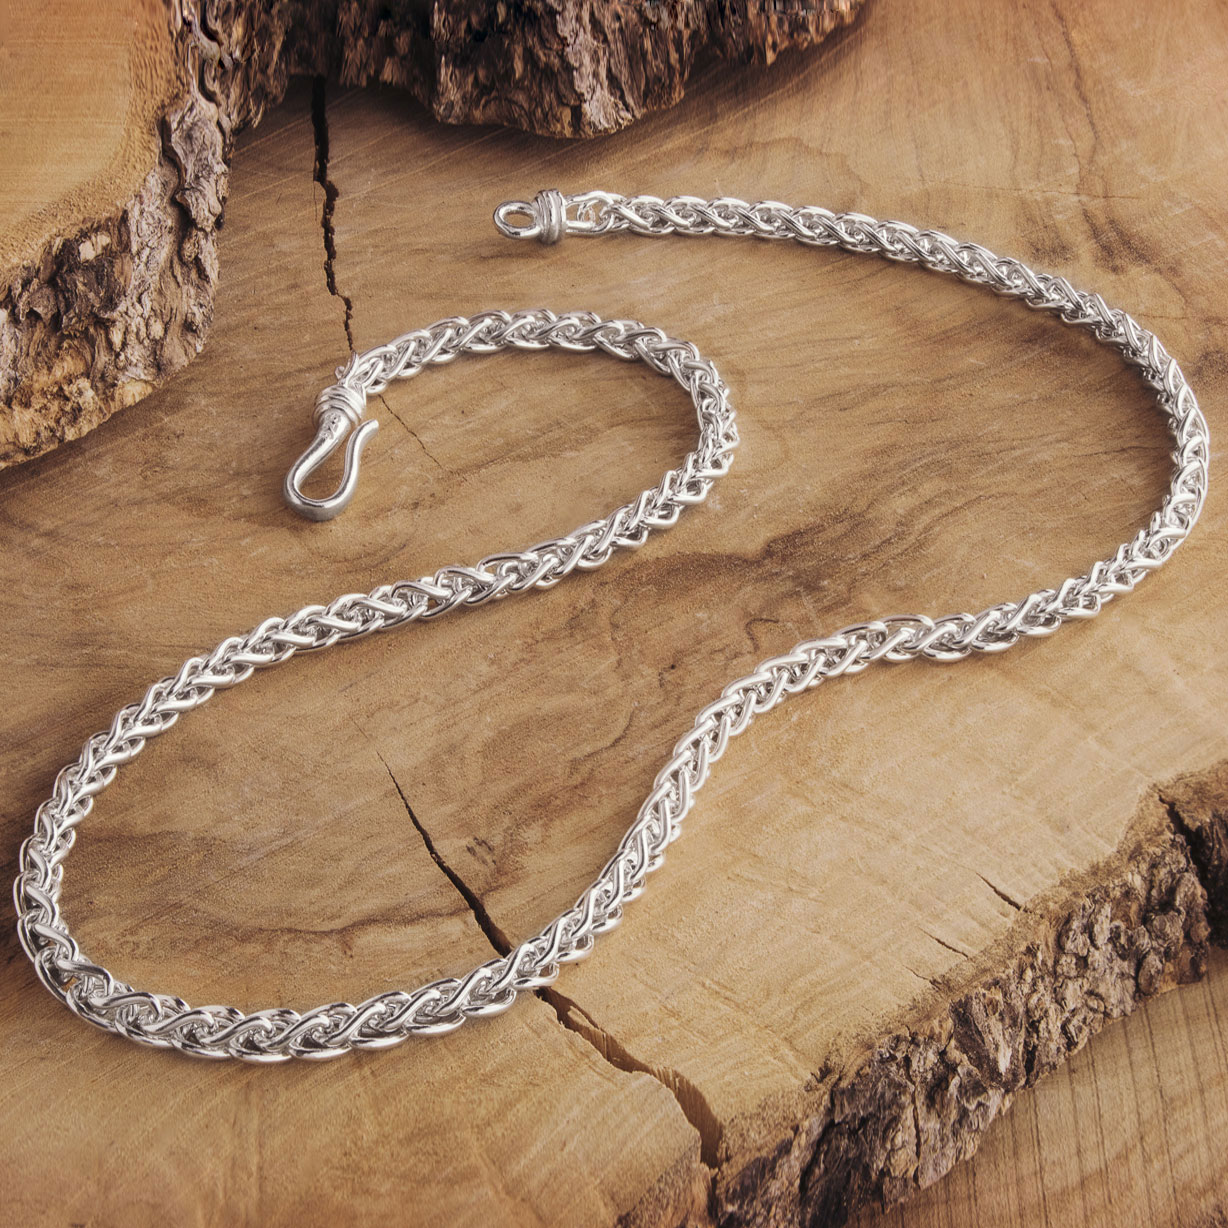 925 Sterling Silver Spiga Wheat Chain Necklace For Women For Men Made In Italy Thin 030 Gauge 16 18 20 24 30 Inch 